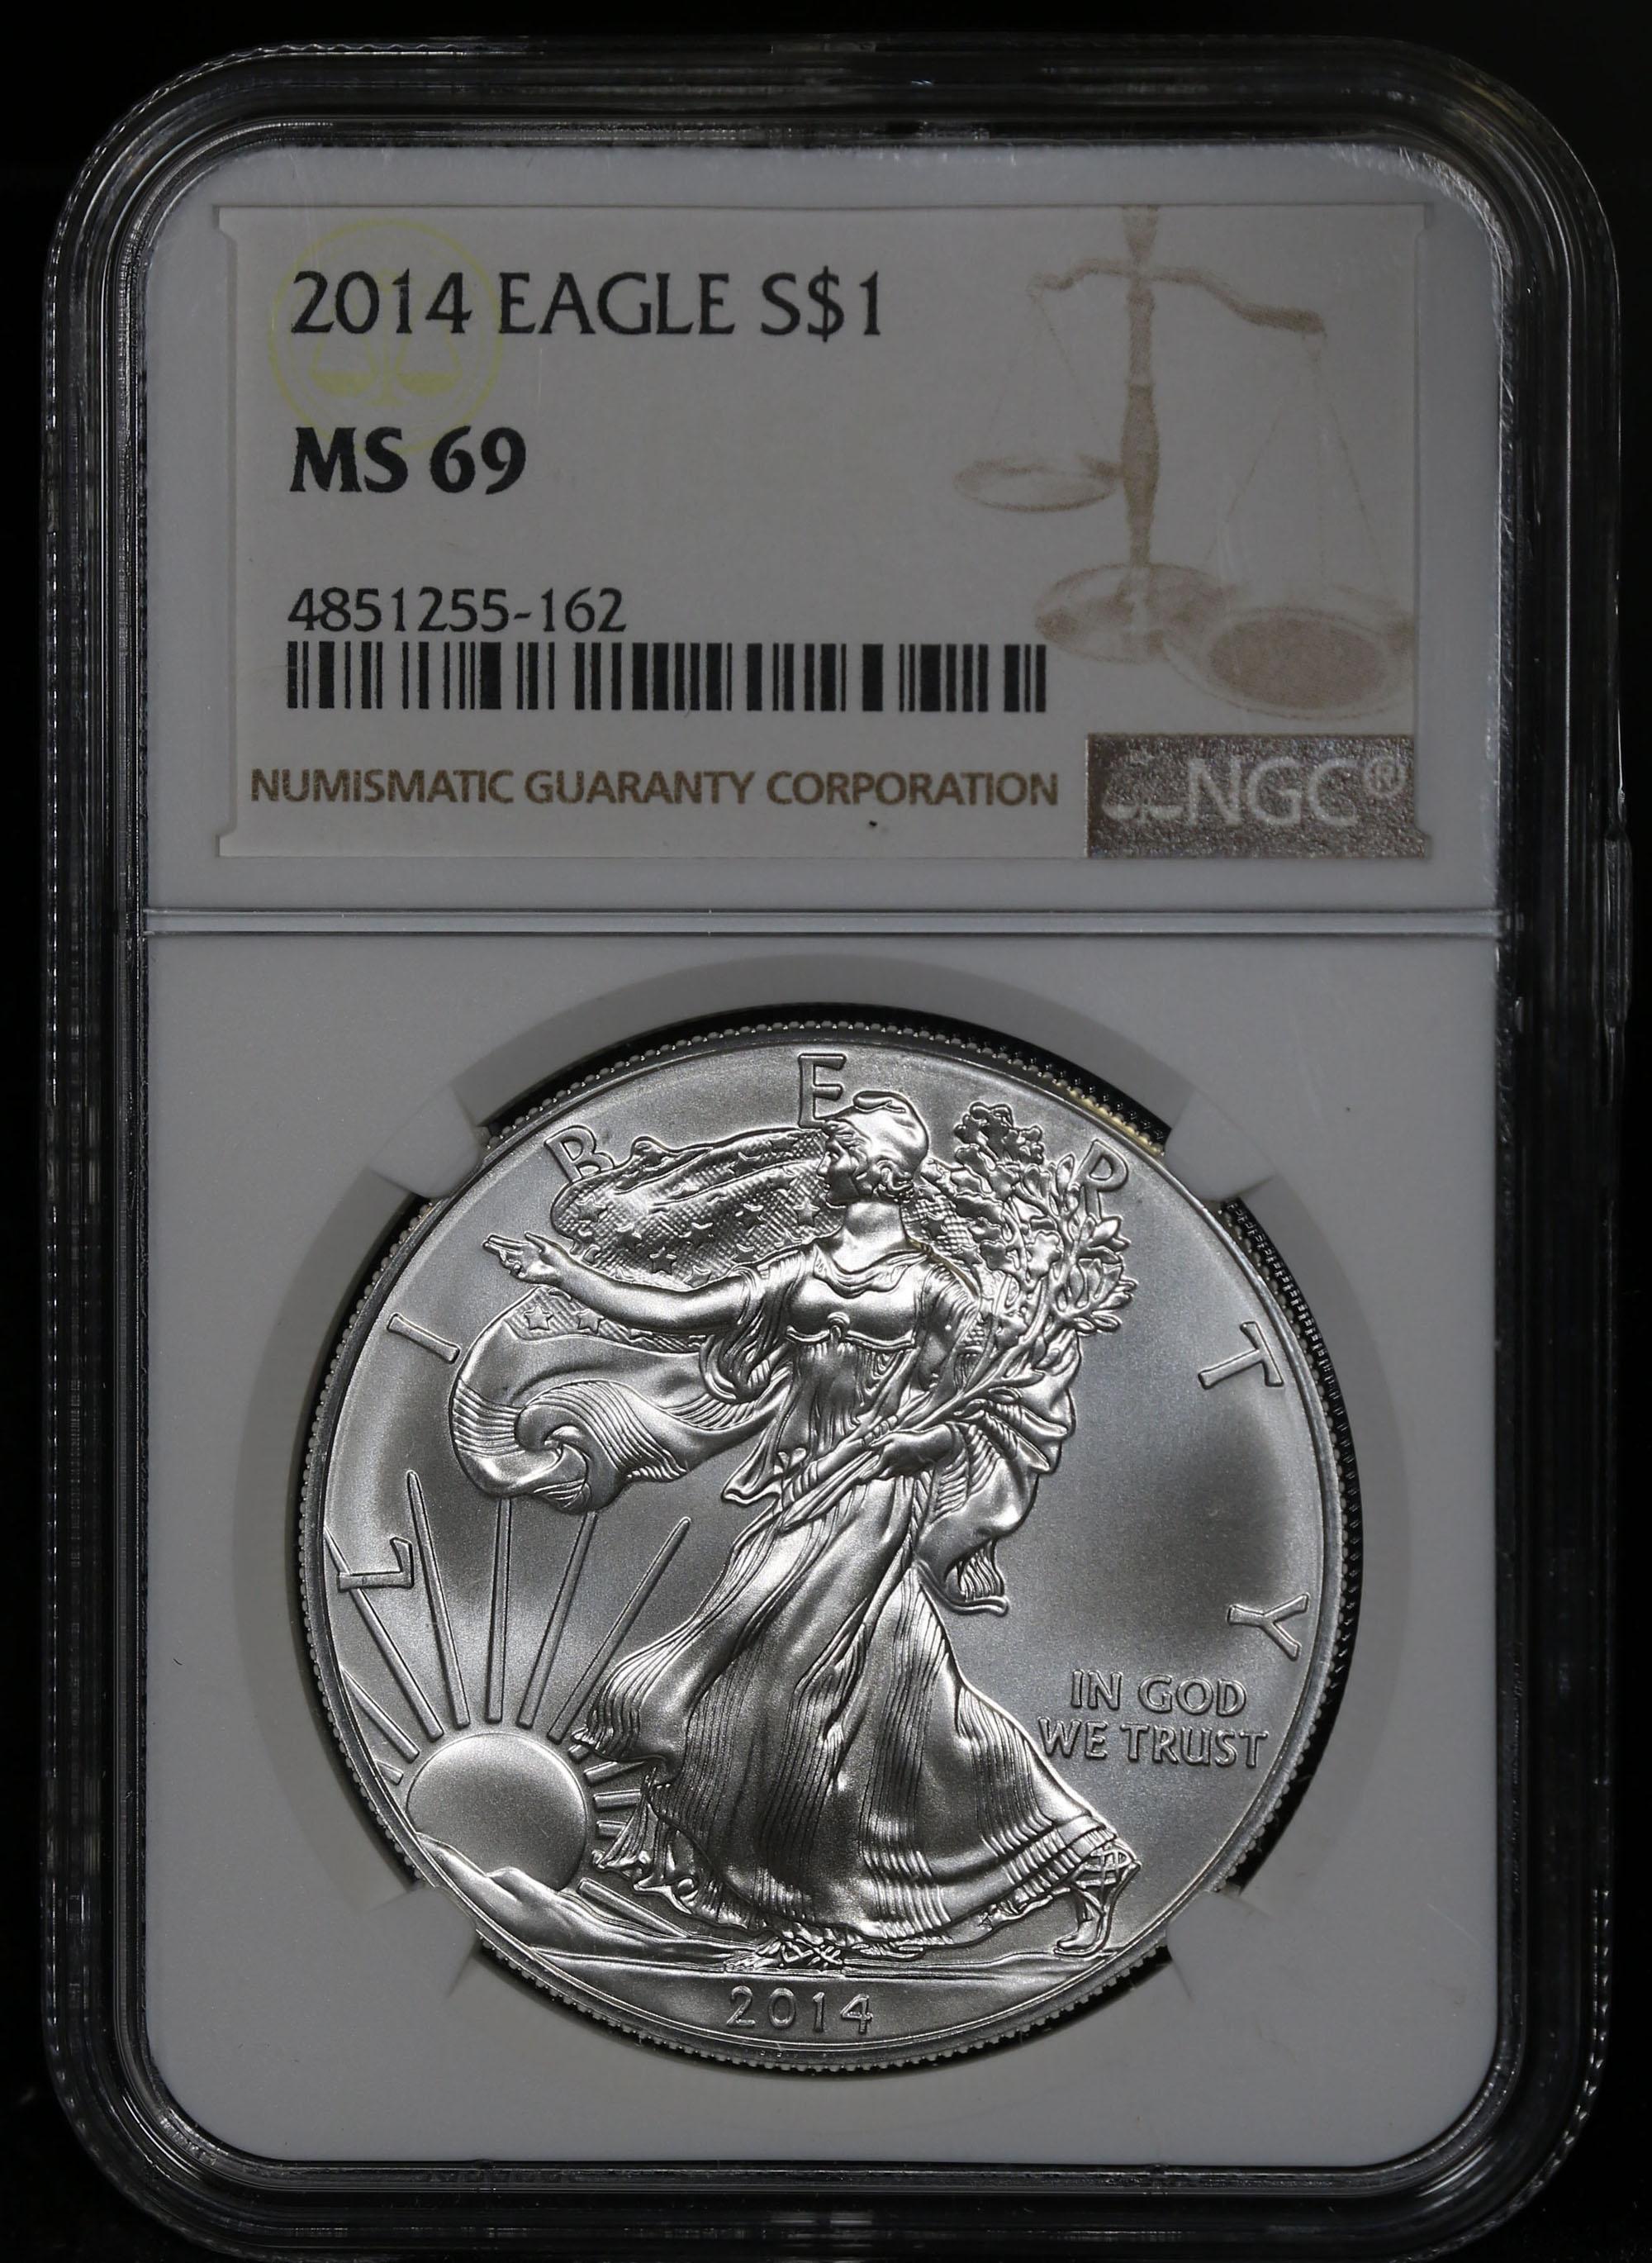 NGC 2014 Silver Eagle Dollar $1 Graded ms69 by NGC